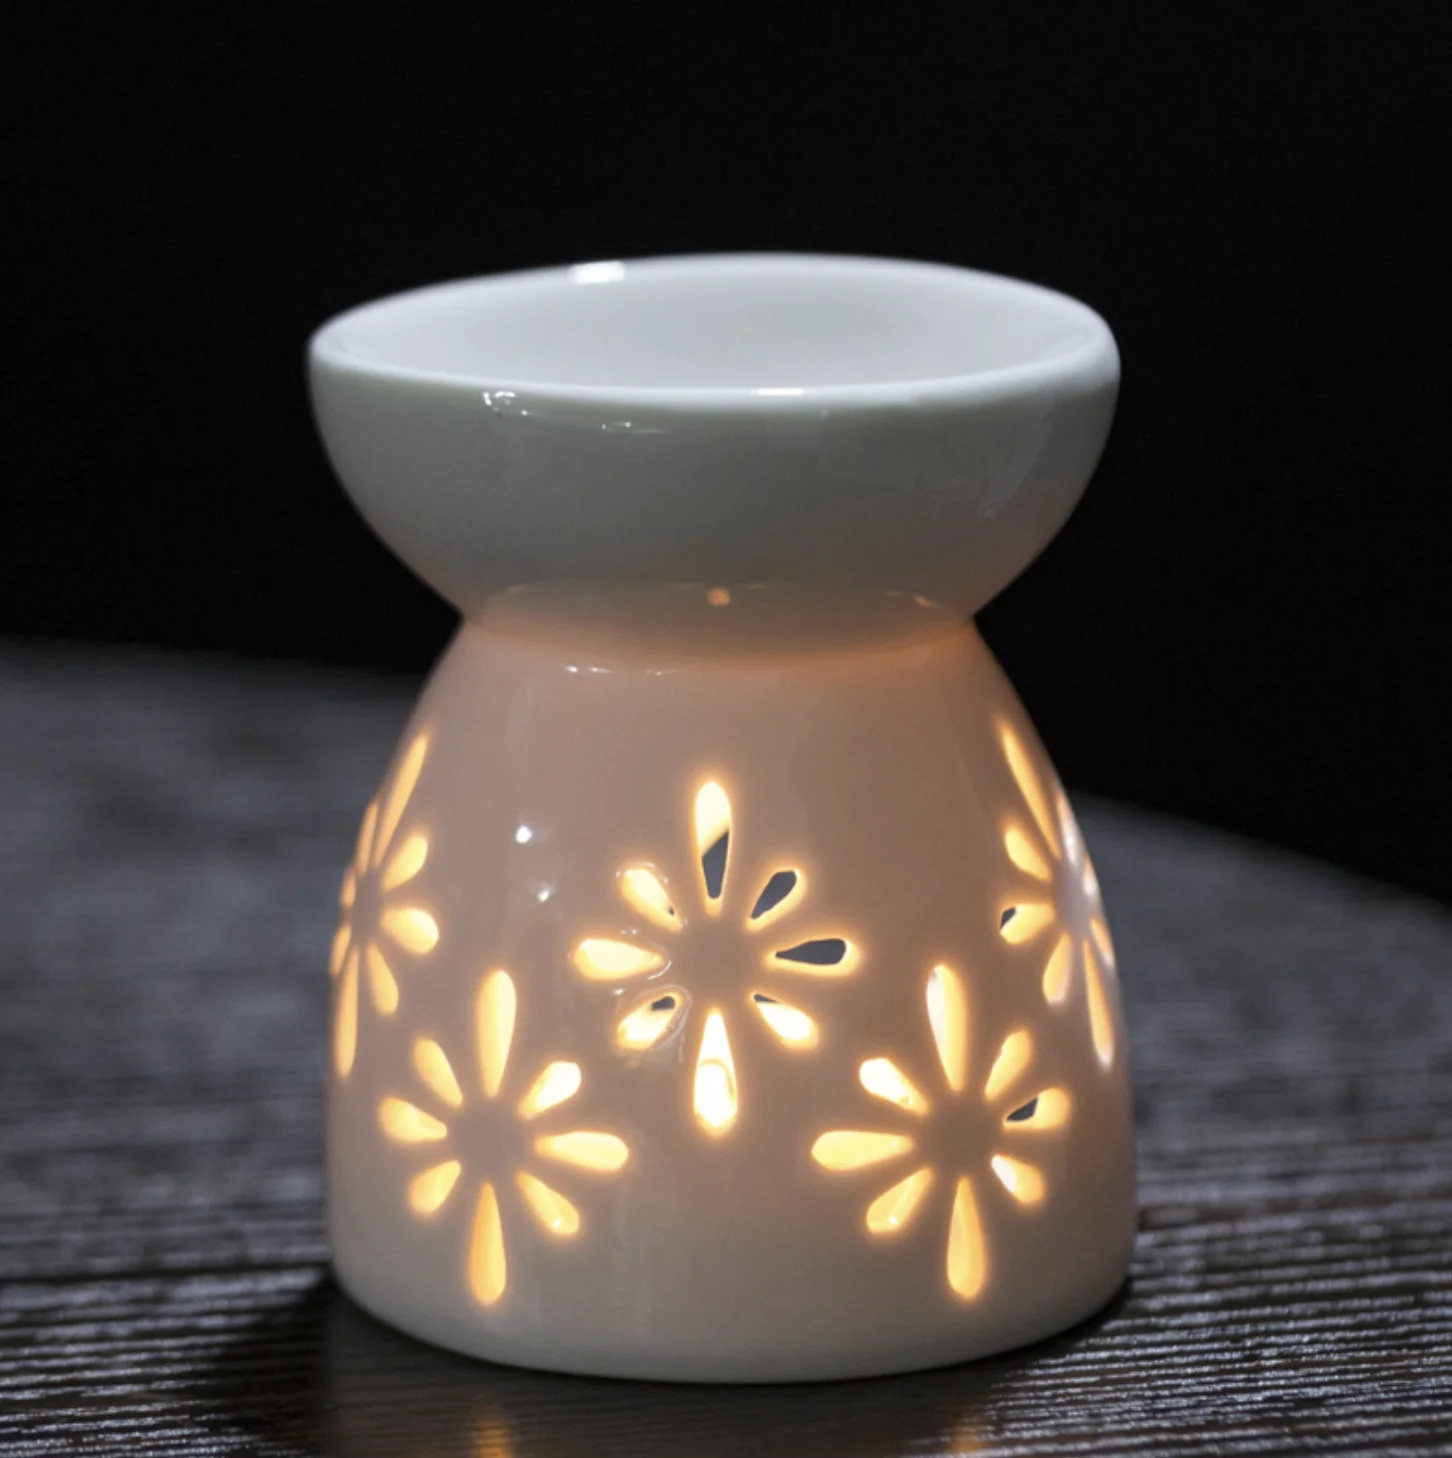 Details about   Ceramic Aromatherapy Burner Hollow Essential Oil Furnace Yoga Spa Candle Holder 